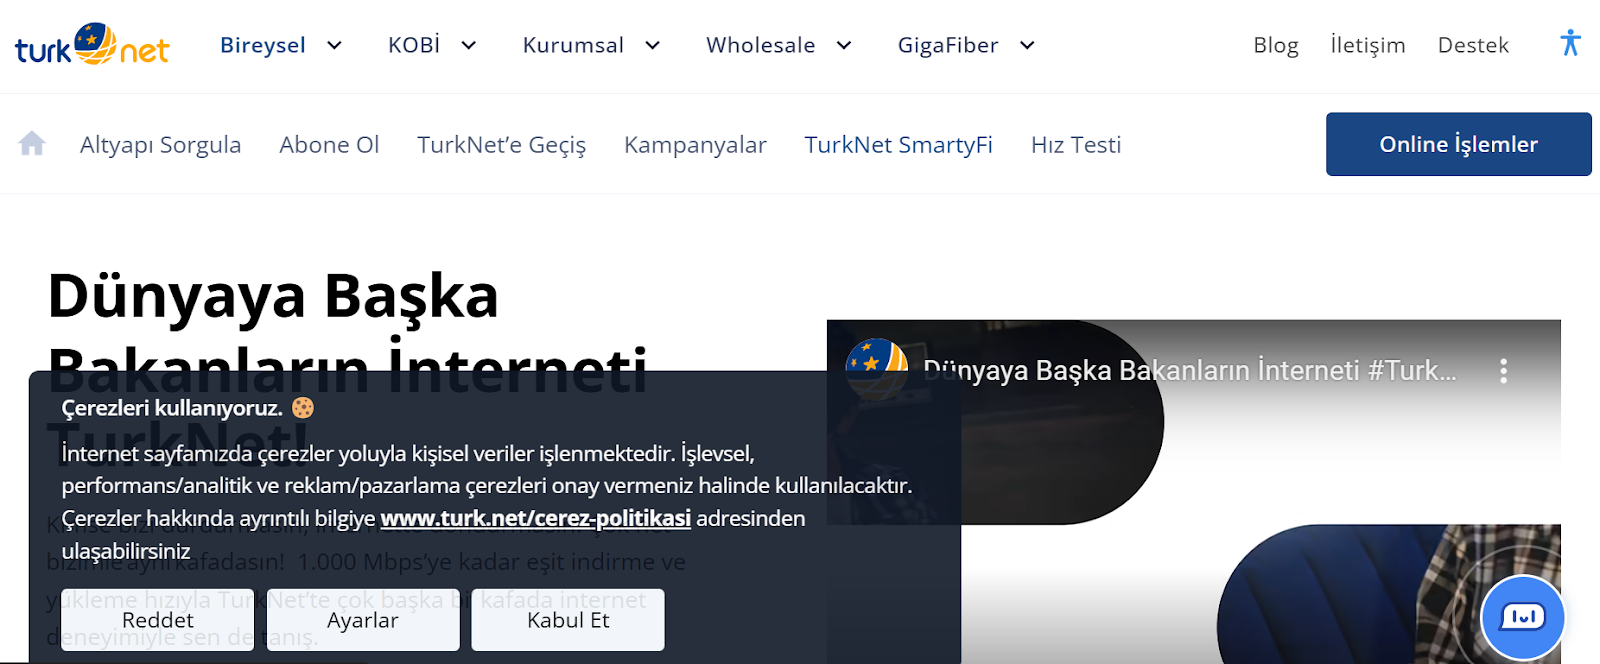 TurkNet website snapshot highlighting the services it offers.